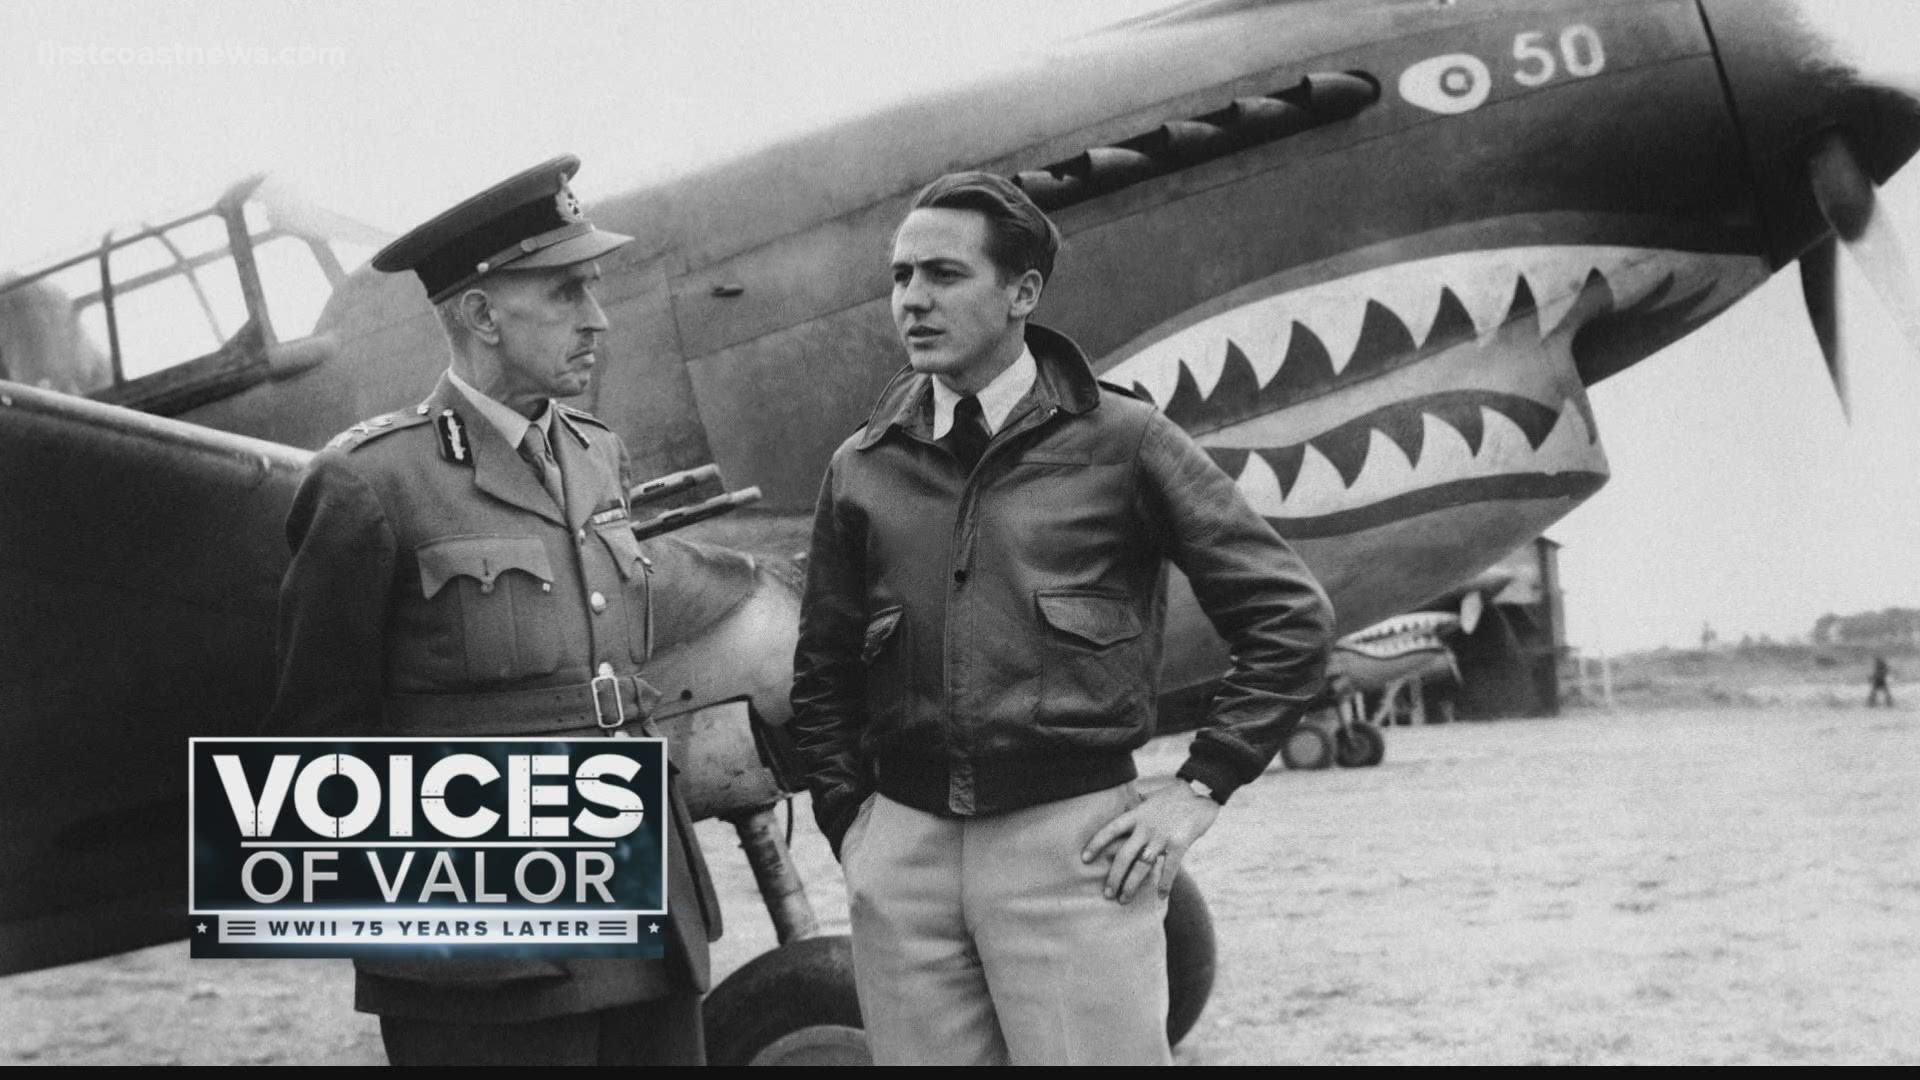 His job was to fly over the Himalayas and take supplies to the famous Flying Tigers, an American volunteer group trying to save China from Japan.